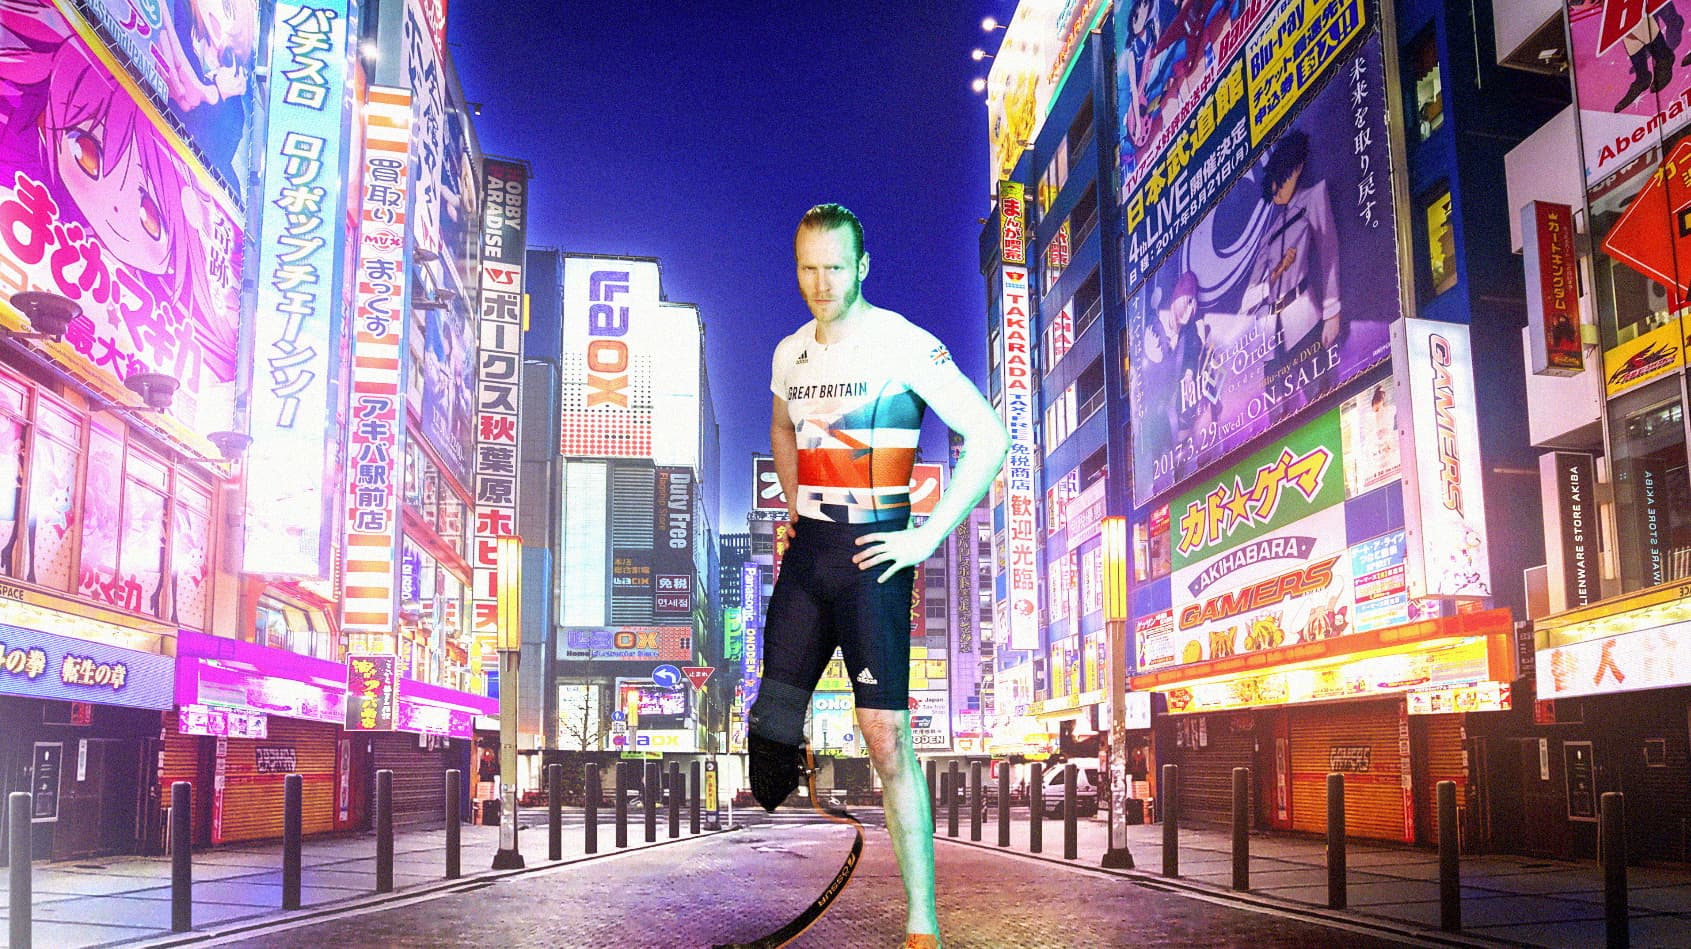 Promotional image of Jonnie Peacock